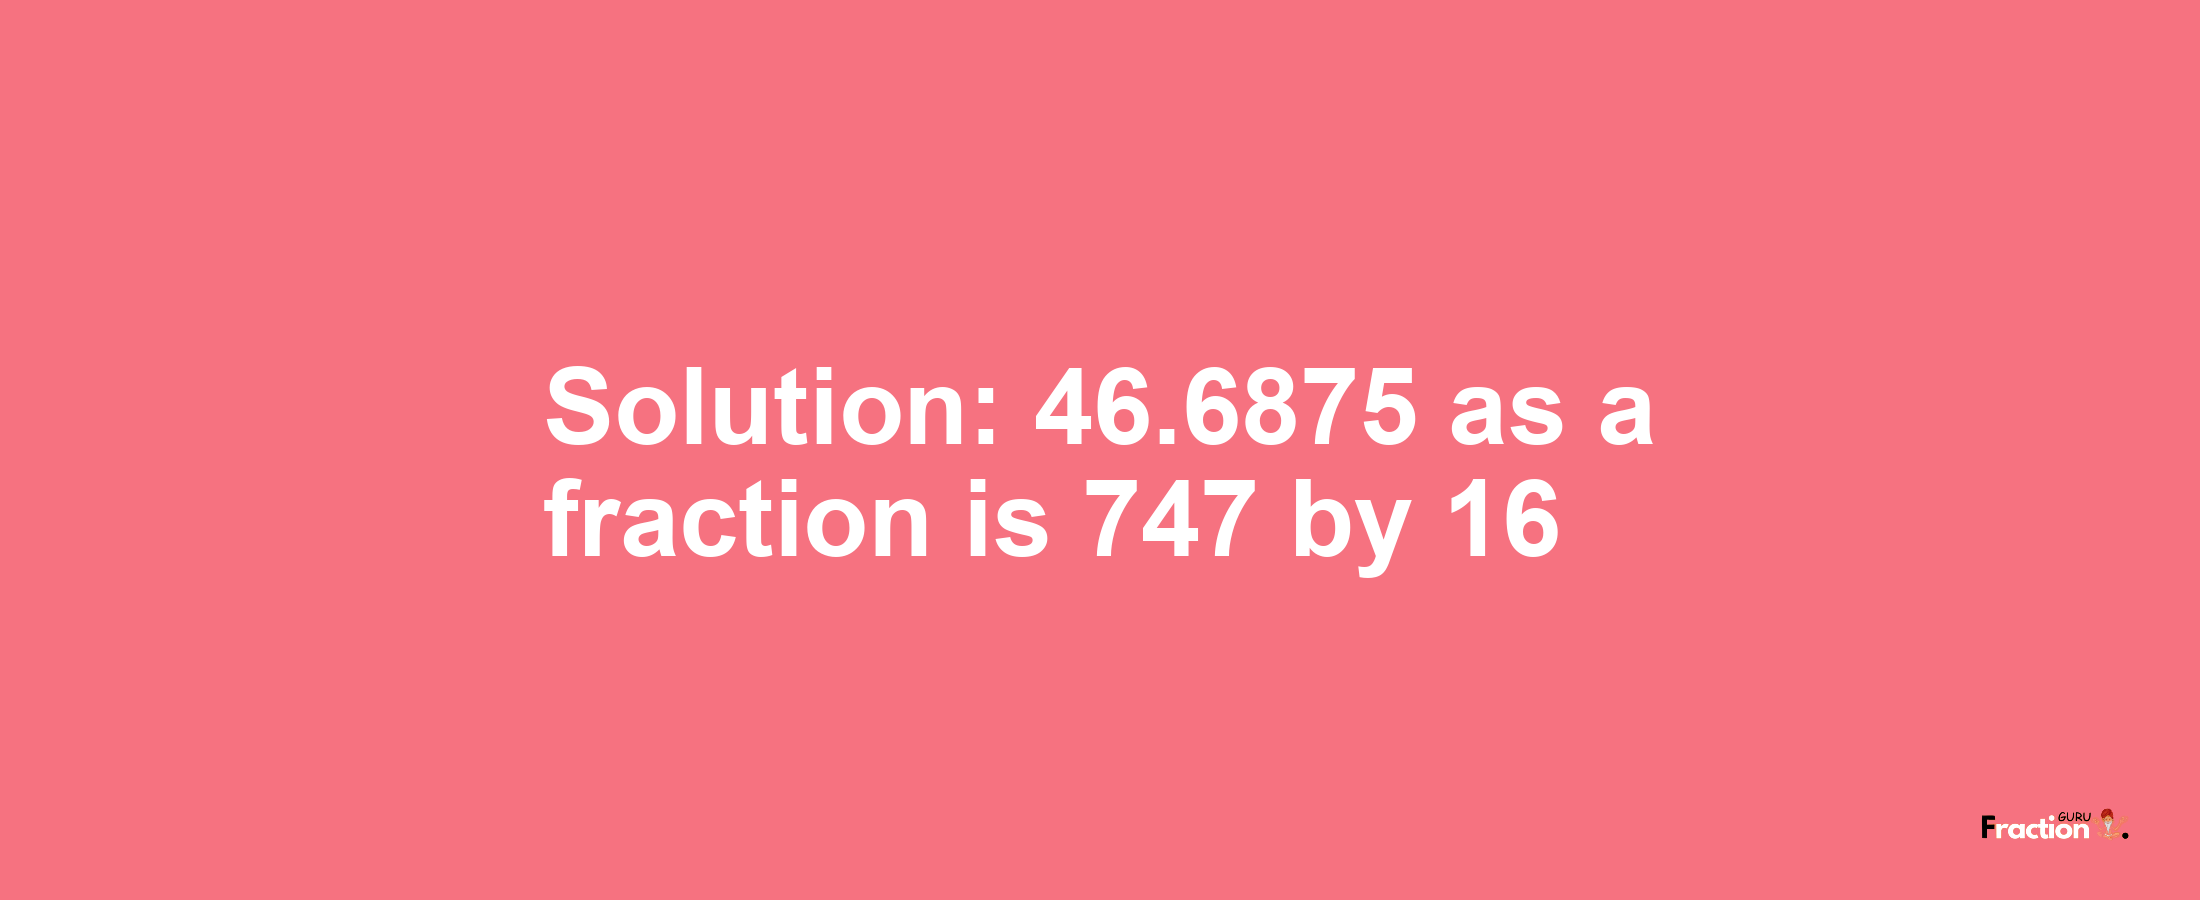 Solution:46.6875 as a fraction is 747/16